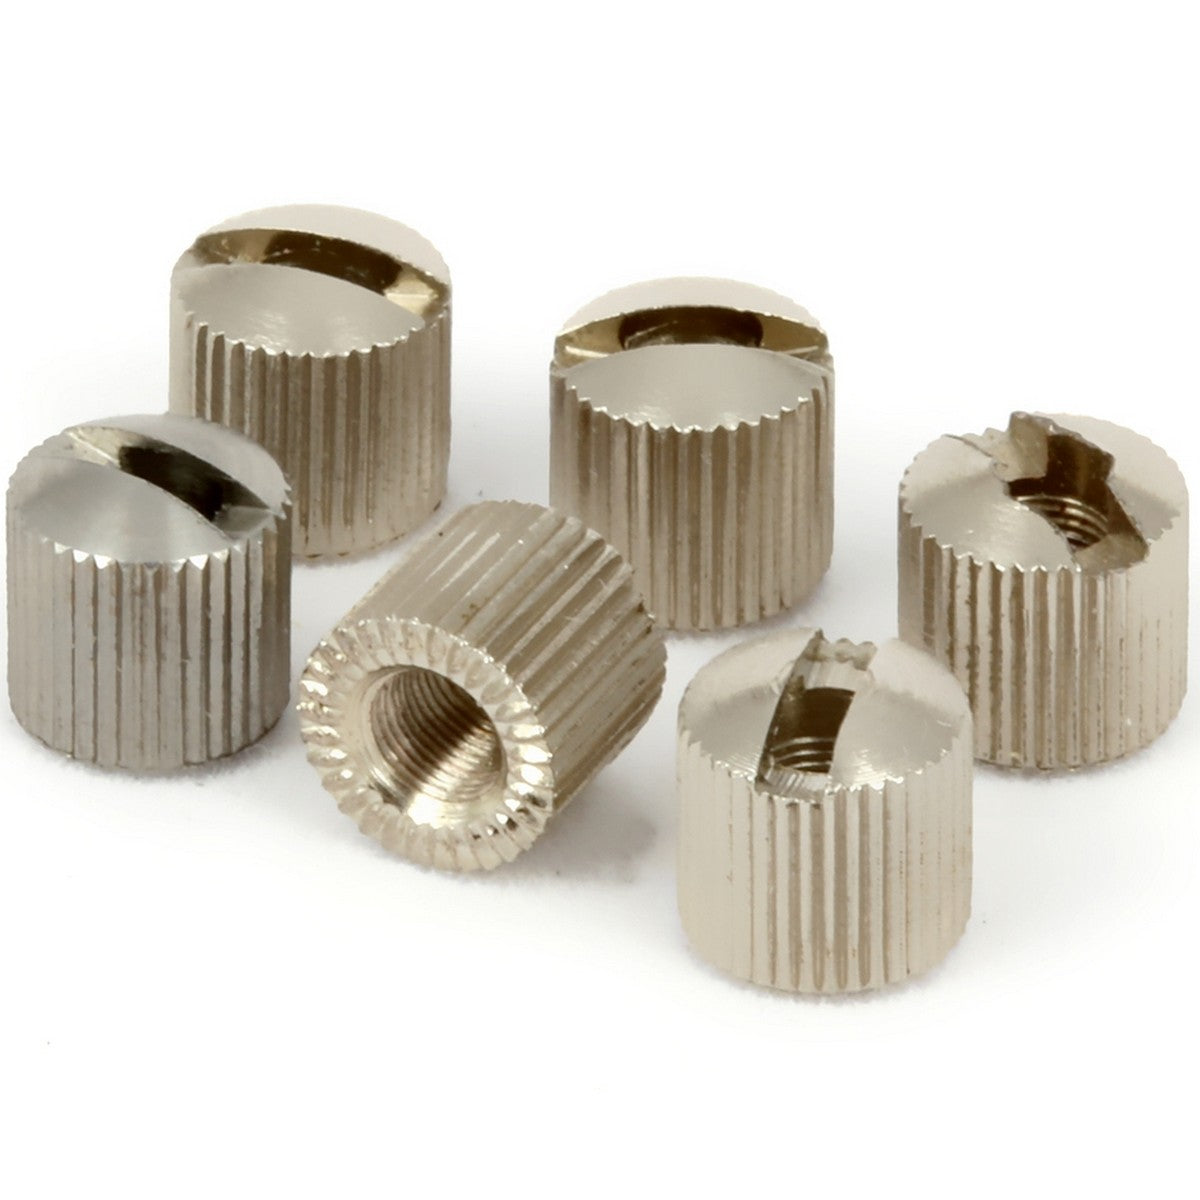 Tronical Lock Nuts | Nuts for TronicalTune RoboHeads Nickel Set of 6